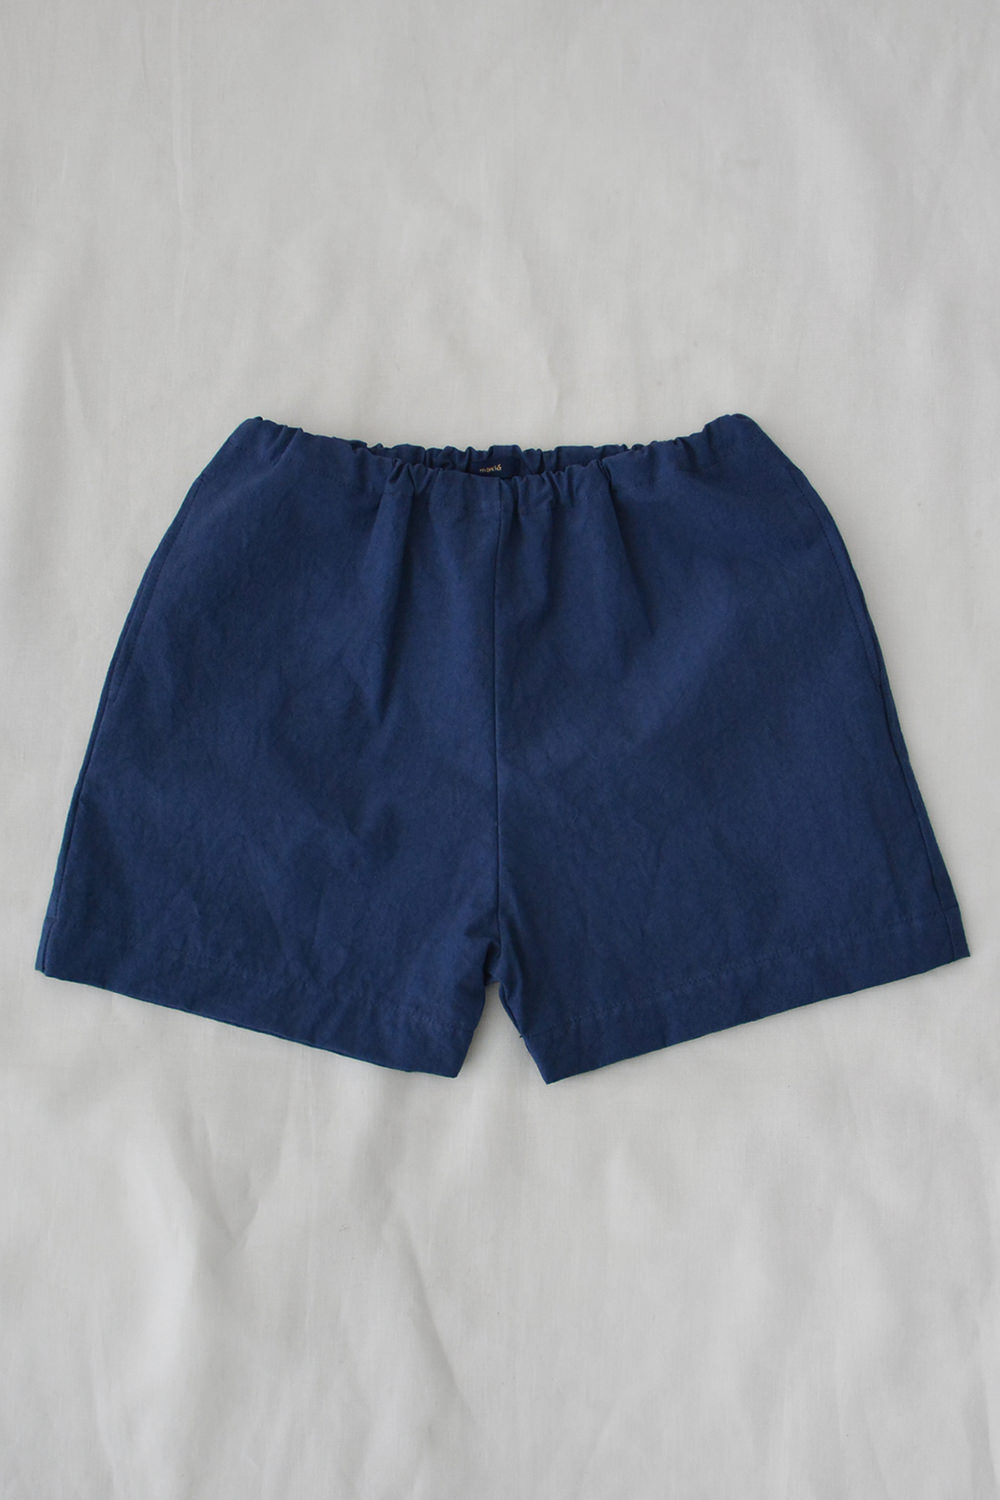 Kid's Summer Shorts - Blue Top Picture